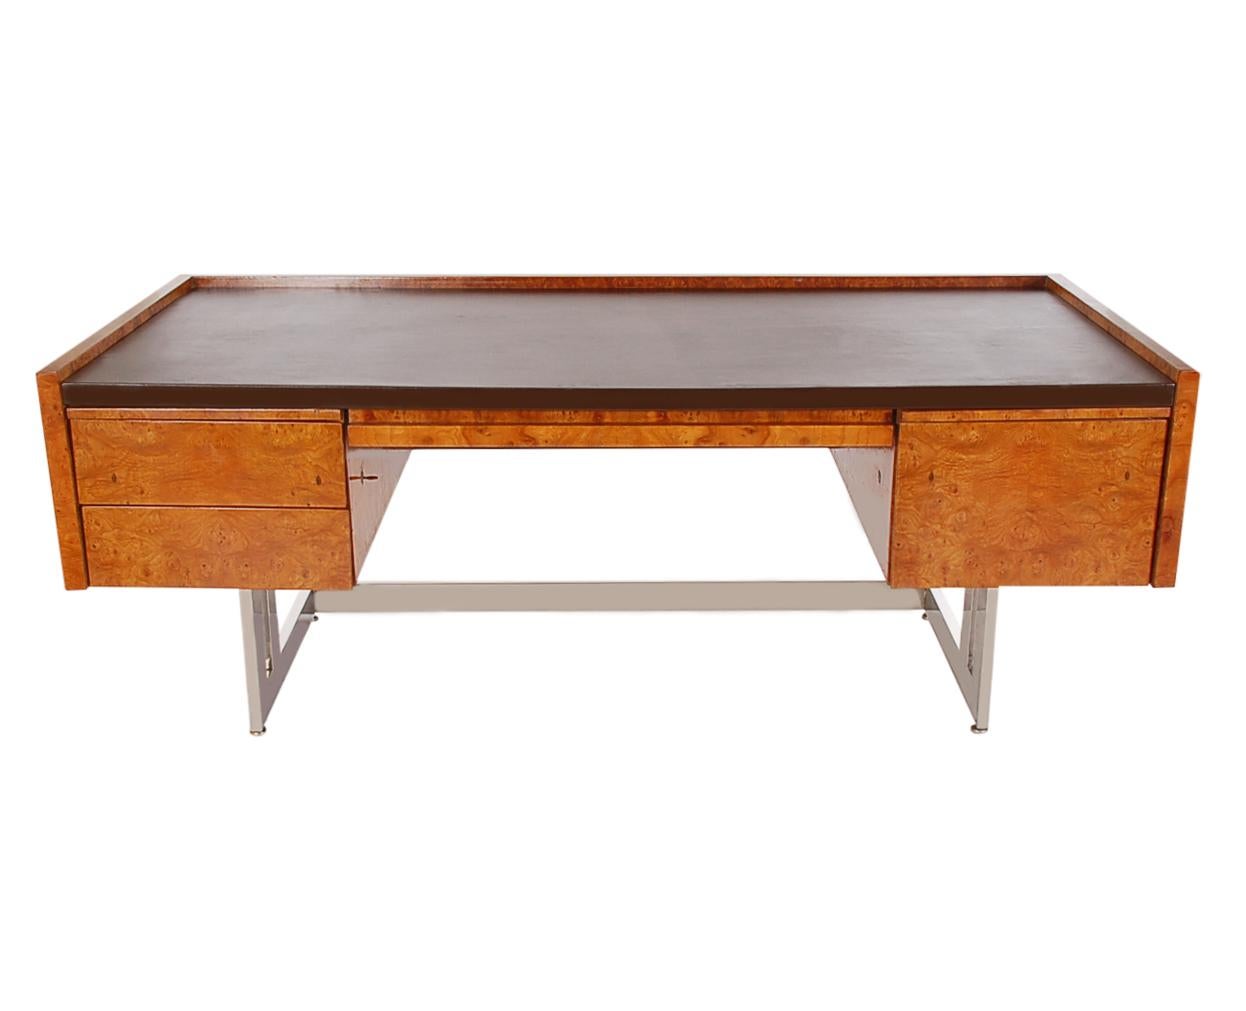 Leather Monumental Cantilevered Mid-Century Modern Executive Desk in Burl and Chrome